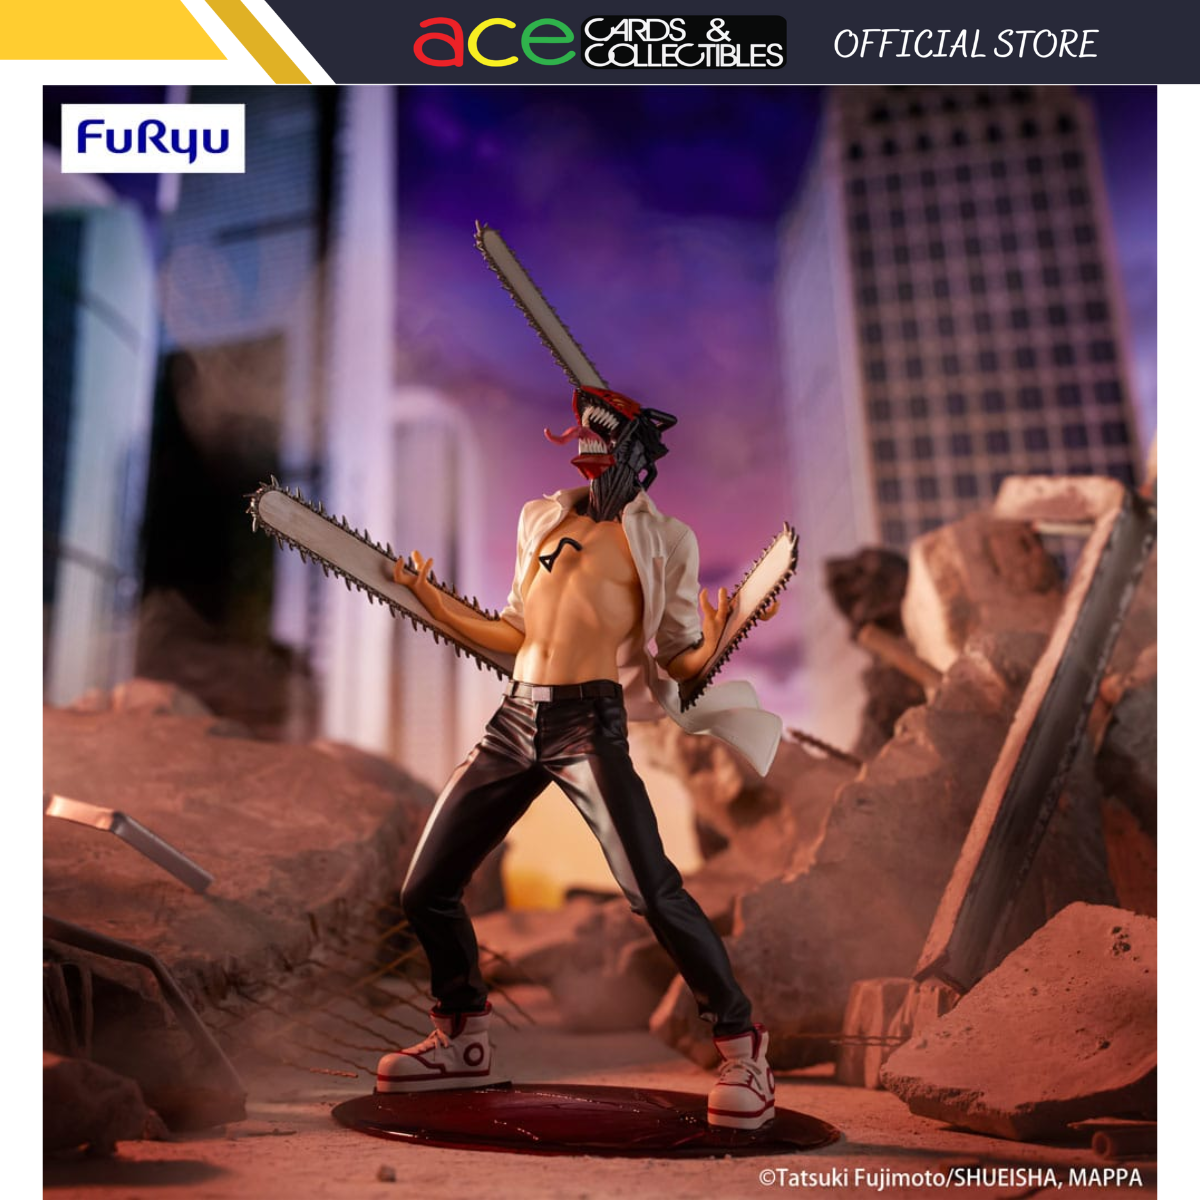 Chainsaw Man Exceed Creative Figure "Chainsaw Man"-FuRyu-Ace Cards & Collectibles